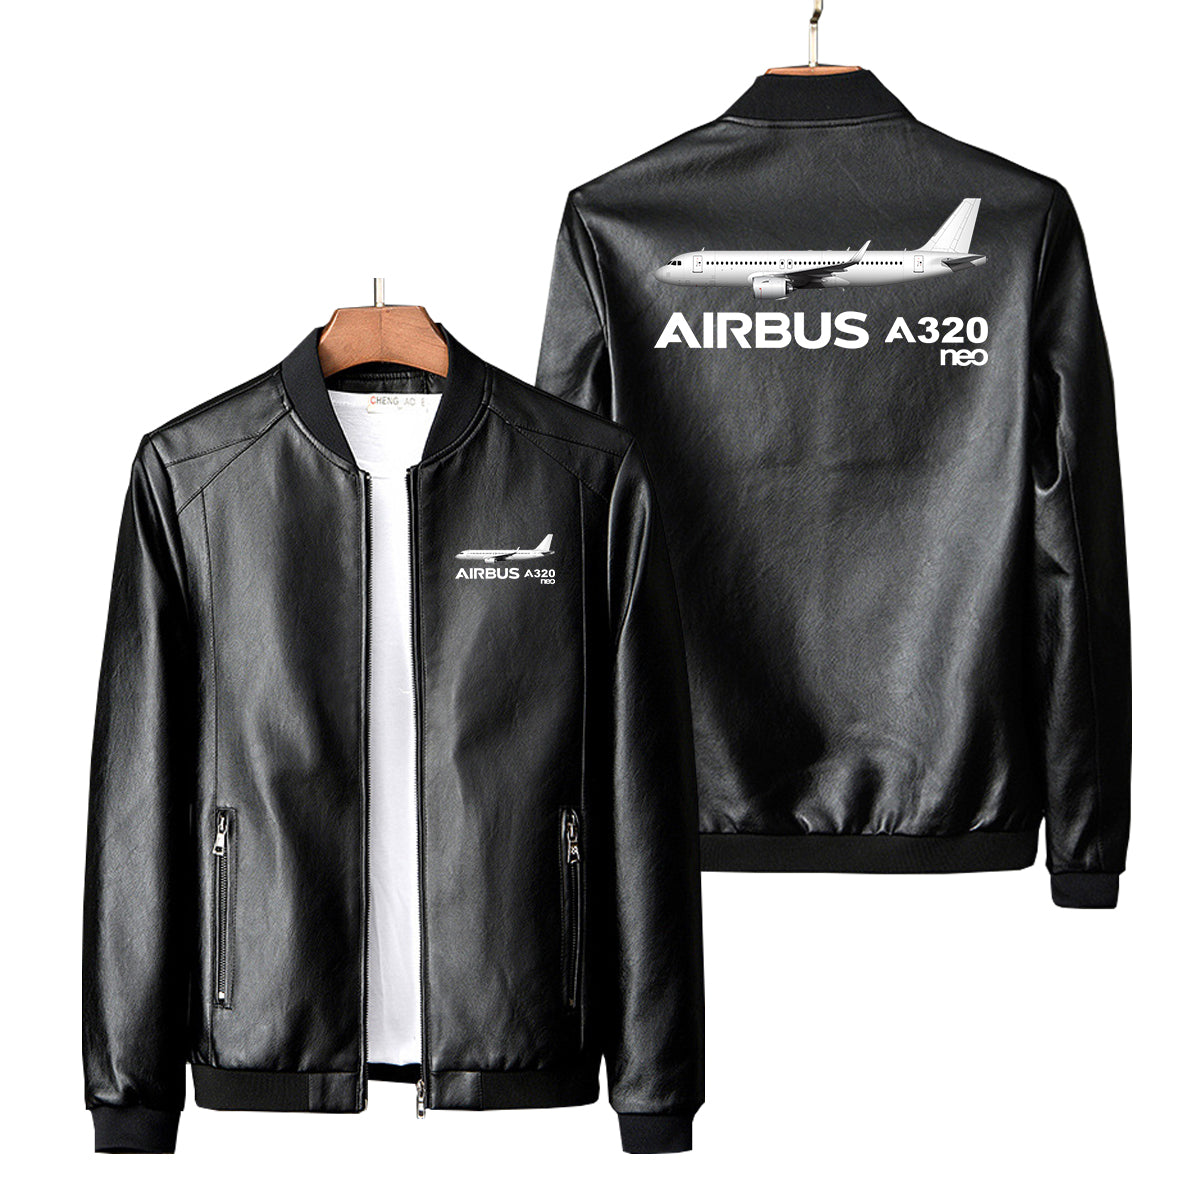 The Airbus A320Neo Designed PU Leather Jackets